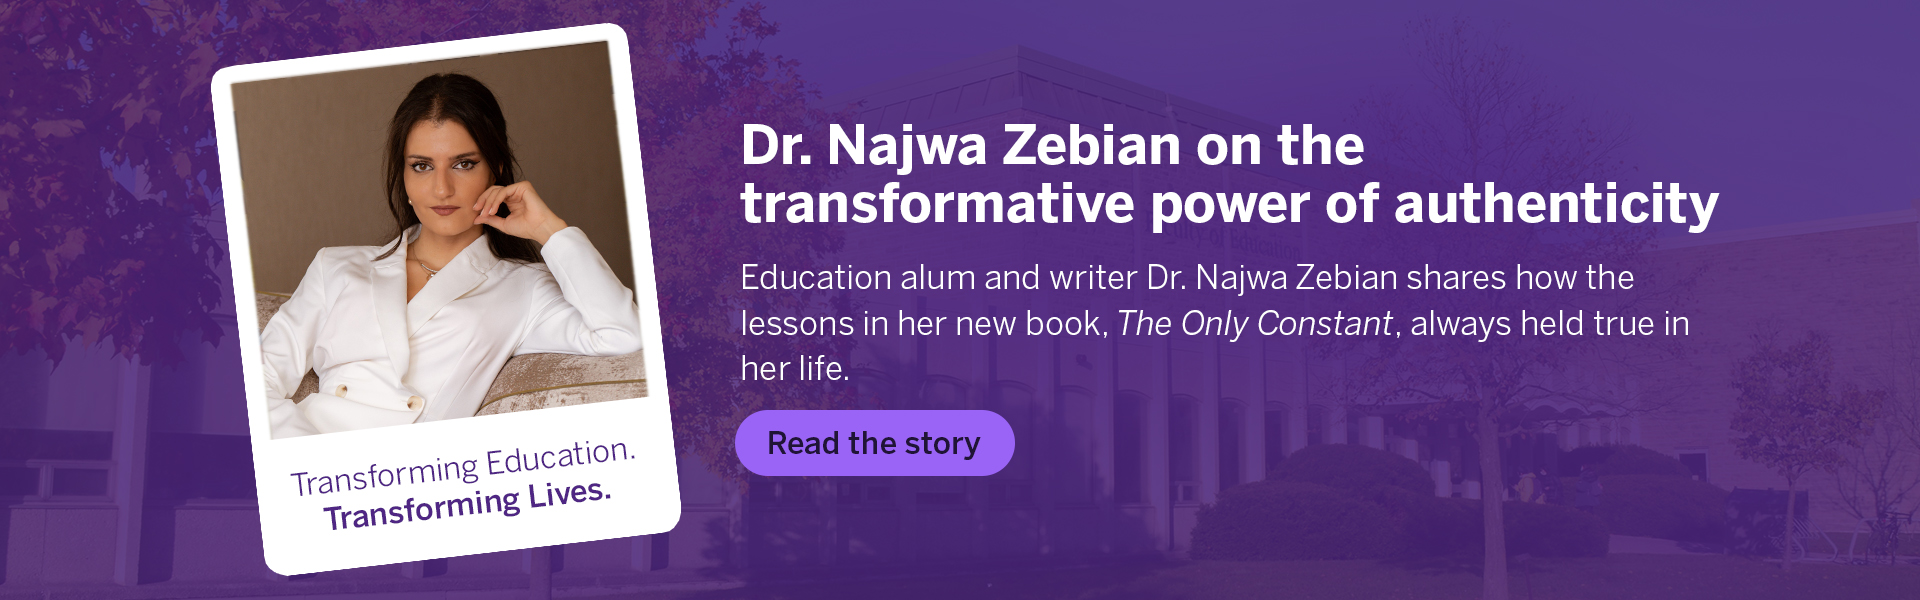 A graphic that features a photo of Education alum and author Dr. Najwa Zebian.